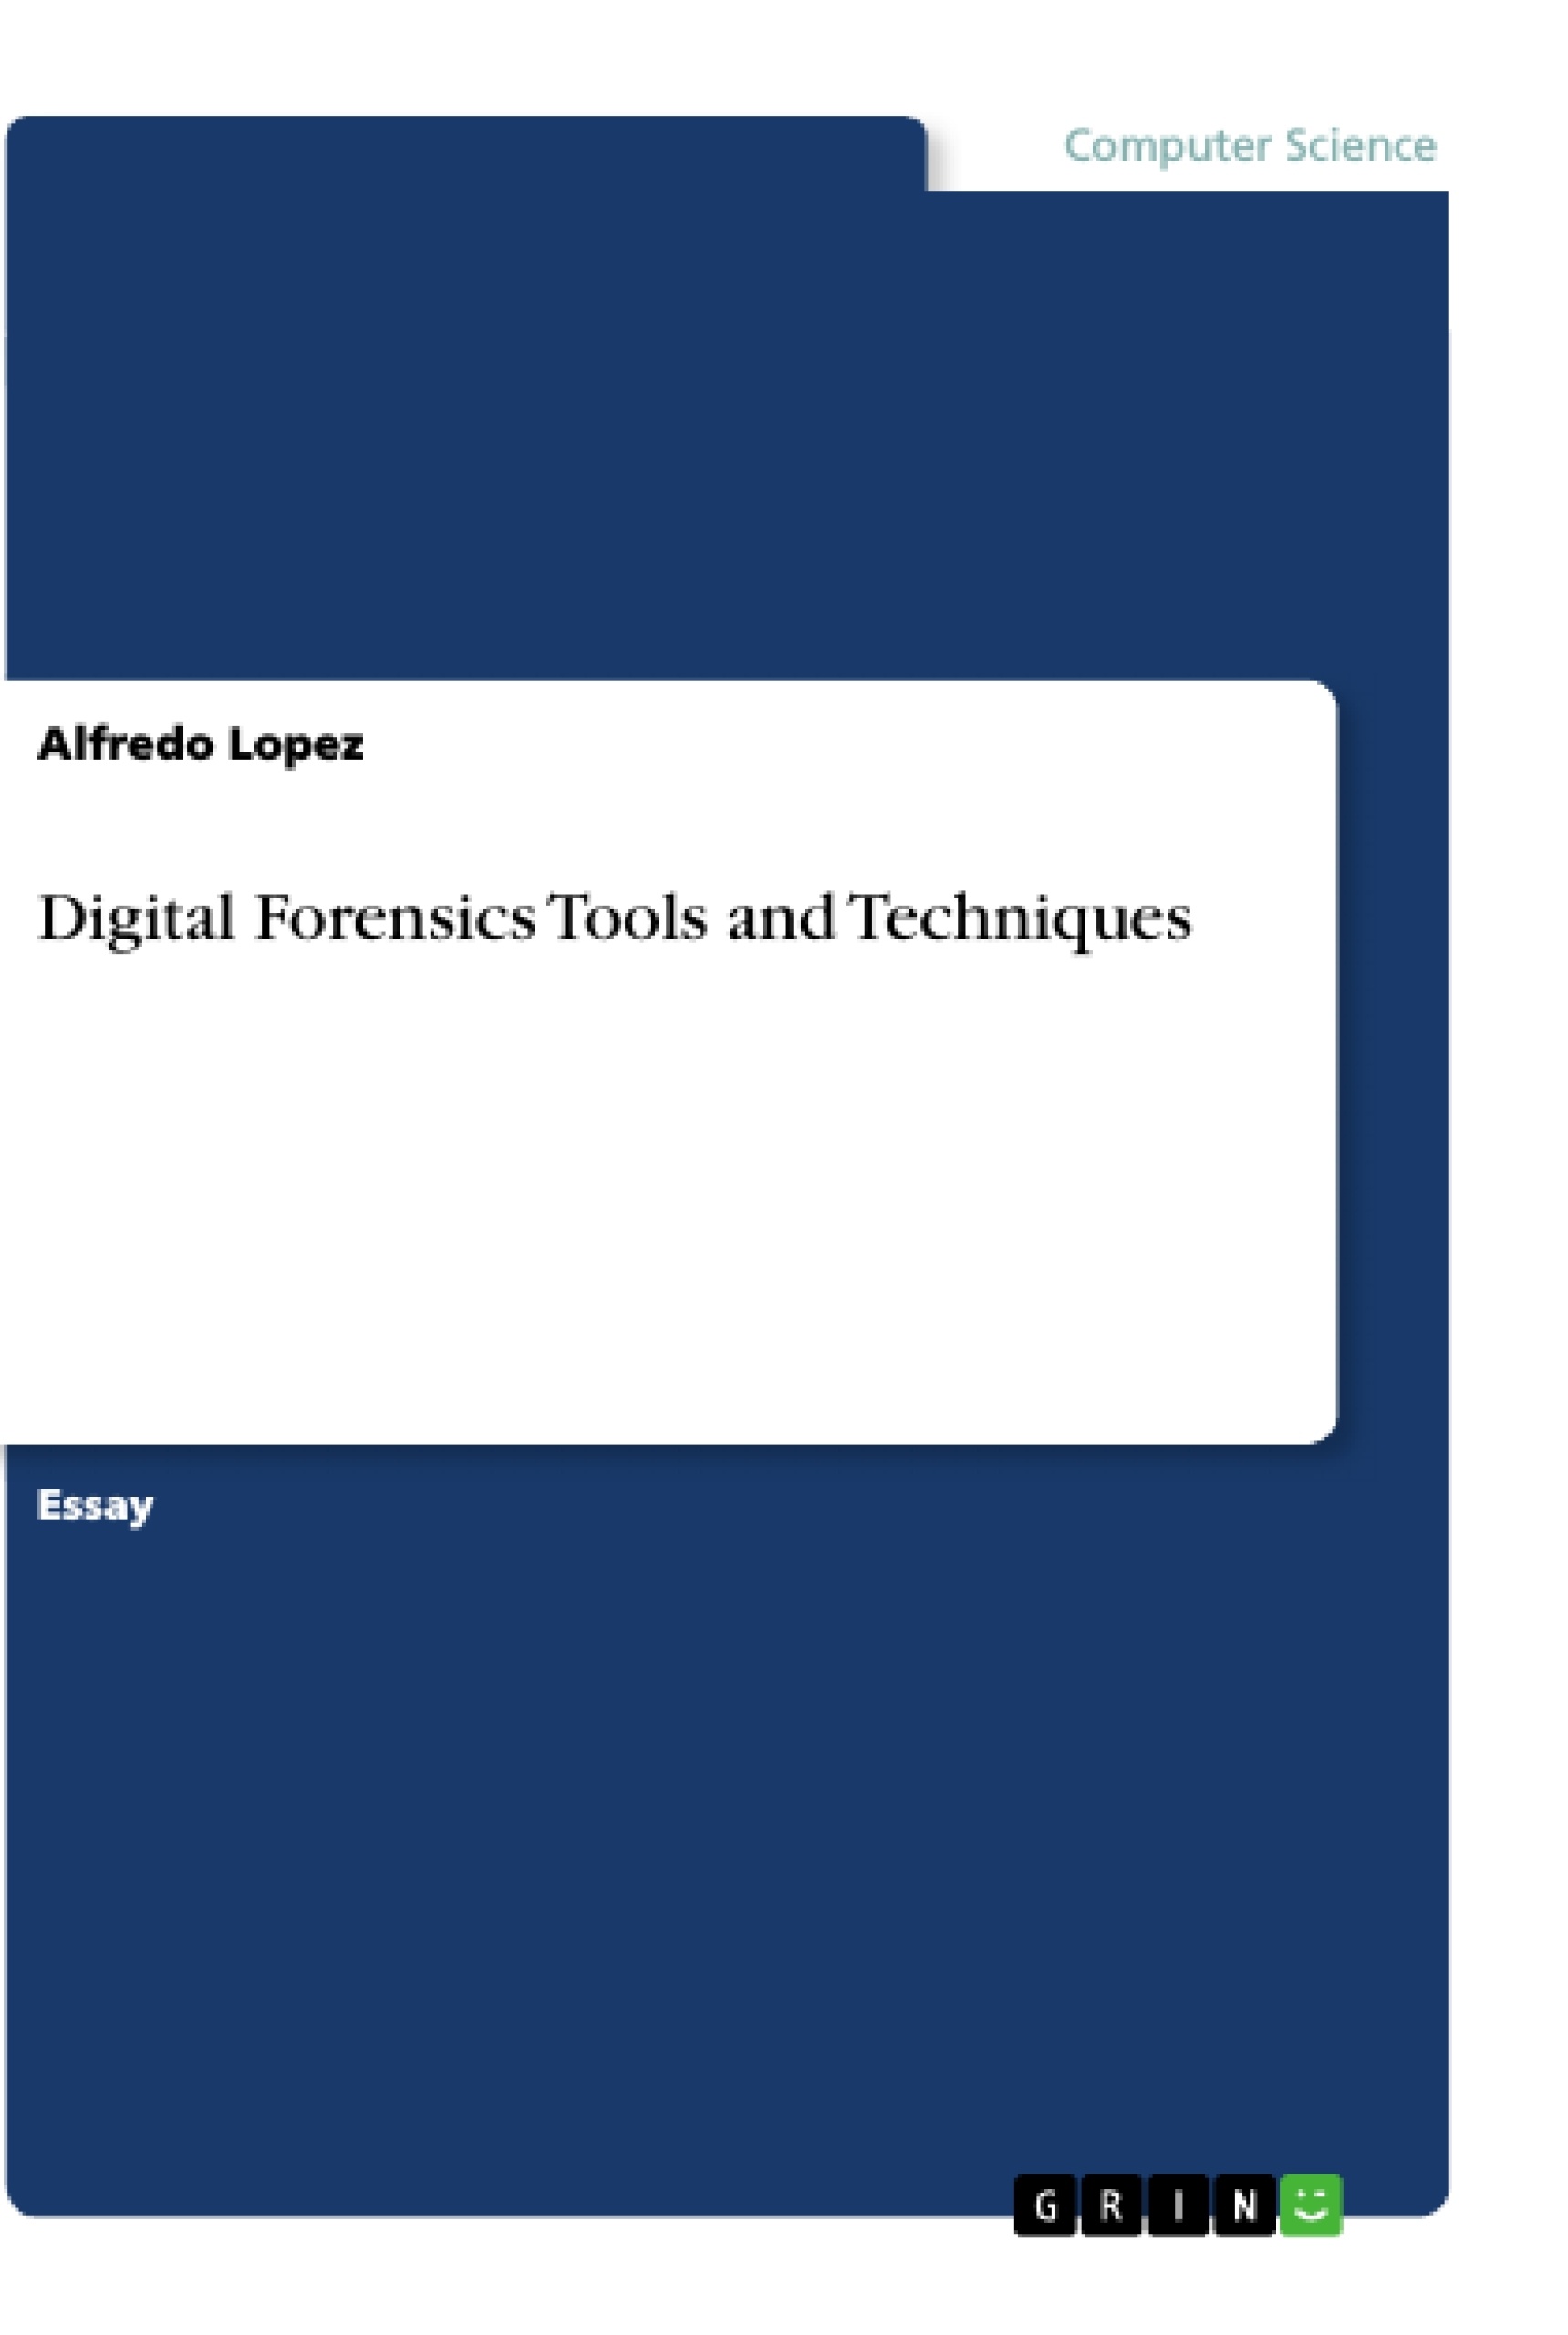 Título: Digital Forensics Tools and Techniques